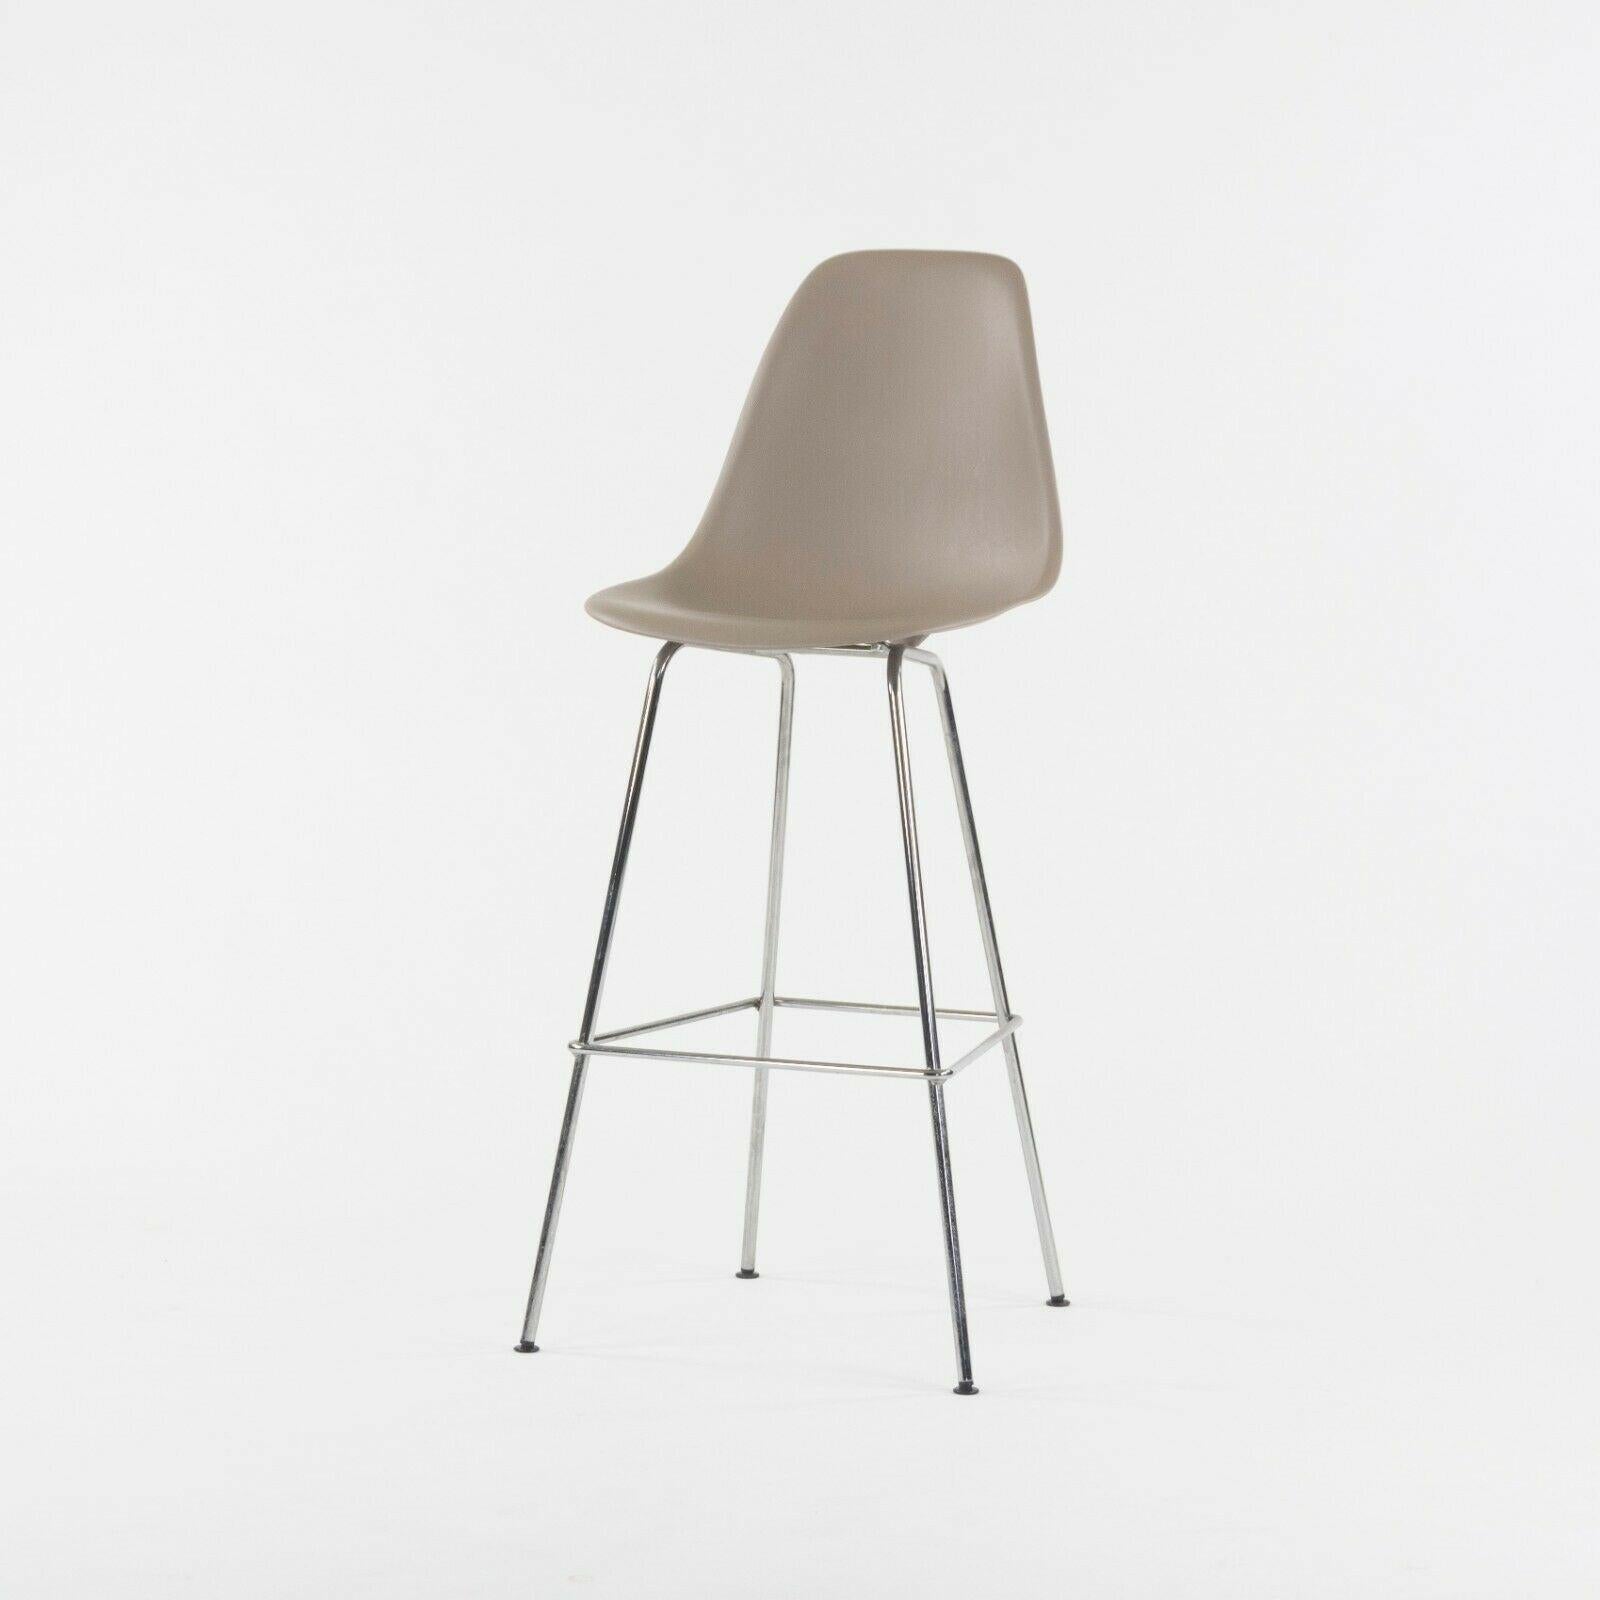 Ray and Charles Eames Herman Miller Molded Shell Bar Stool Chair Sparrow Grey 2